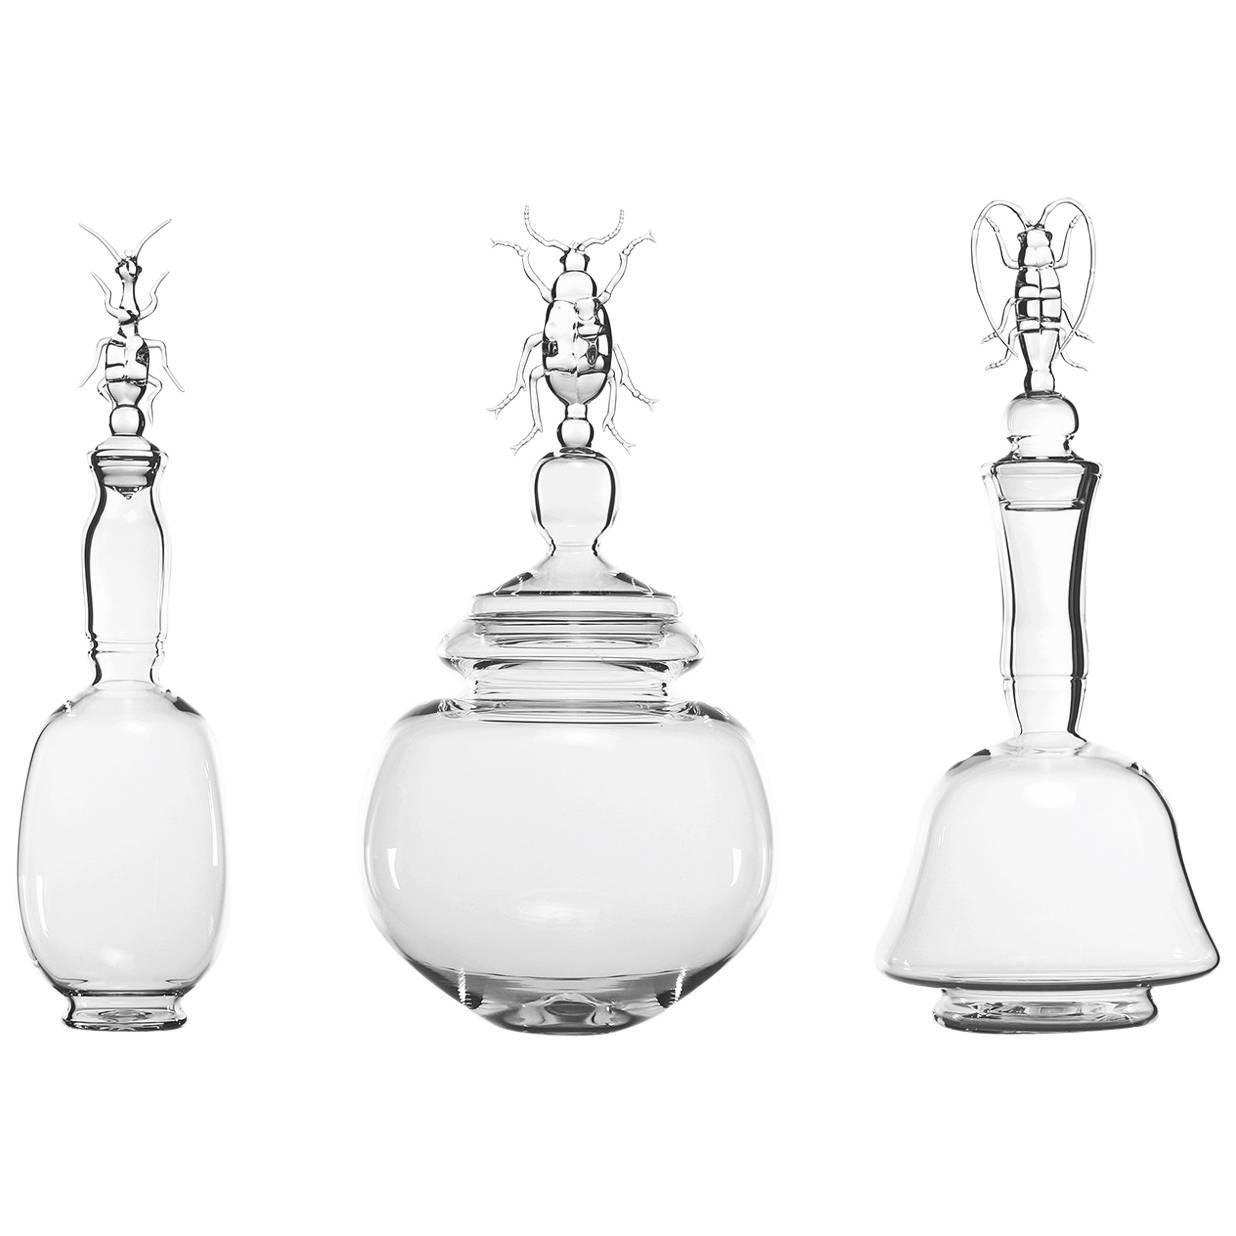 Inspired by the shape of the Colliuris Pensylvanica, or ground beetle, this exquisite bottle with lid is part of a limited edition of only 29 pieces, all handcrafted of borosilicate glass. The elongated body and narrow mouth of the piece is topped